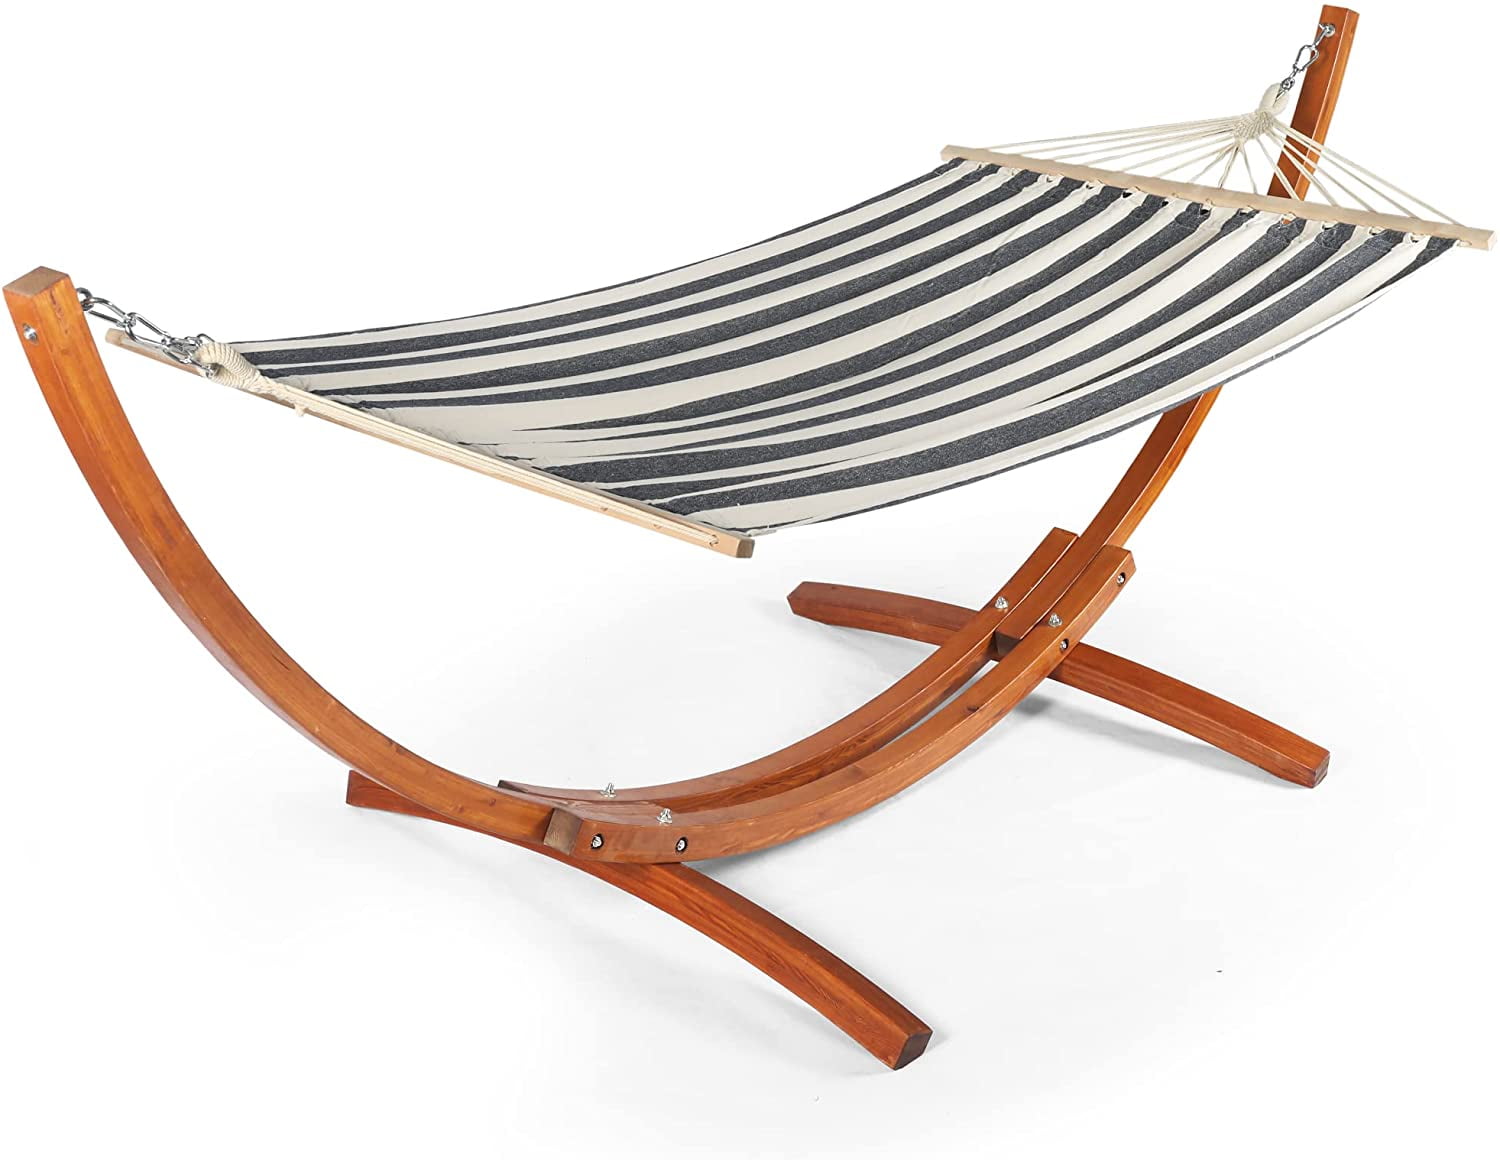 Blue Max Weight: 250 Pounds 24 Inch Wide Seat Solid Wood Bars Sunnydaze Deluxe Hanging Hammock Air Chair with Pillow and Drink Holder 